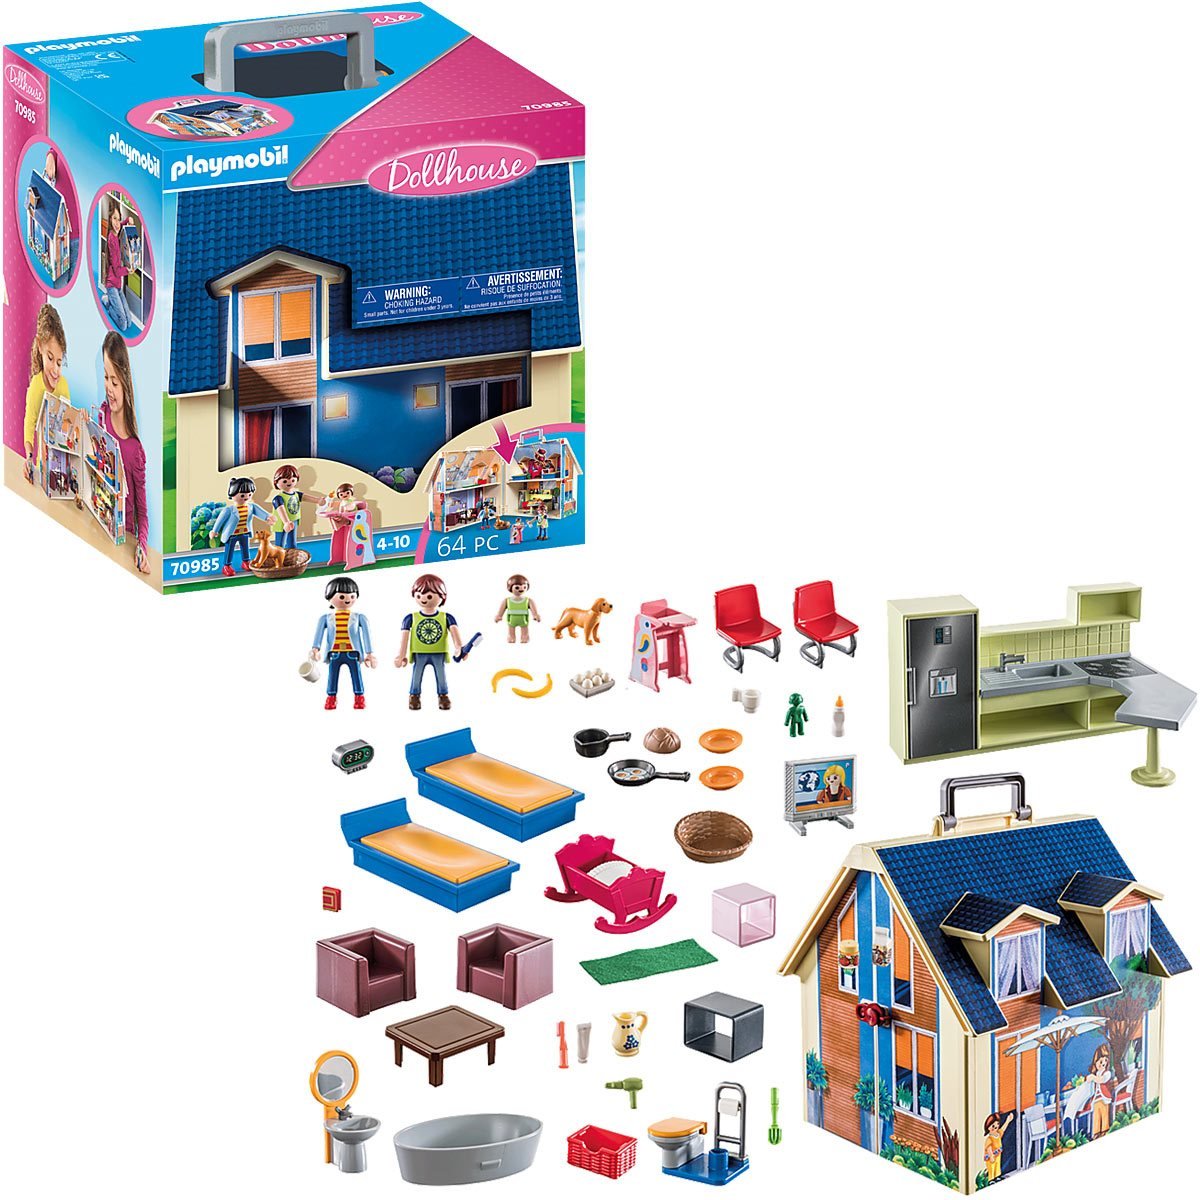 Playmobil Large Dollhouse, Recommended for ages 4 years and up 